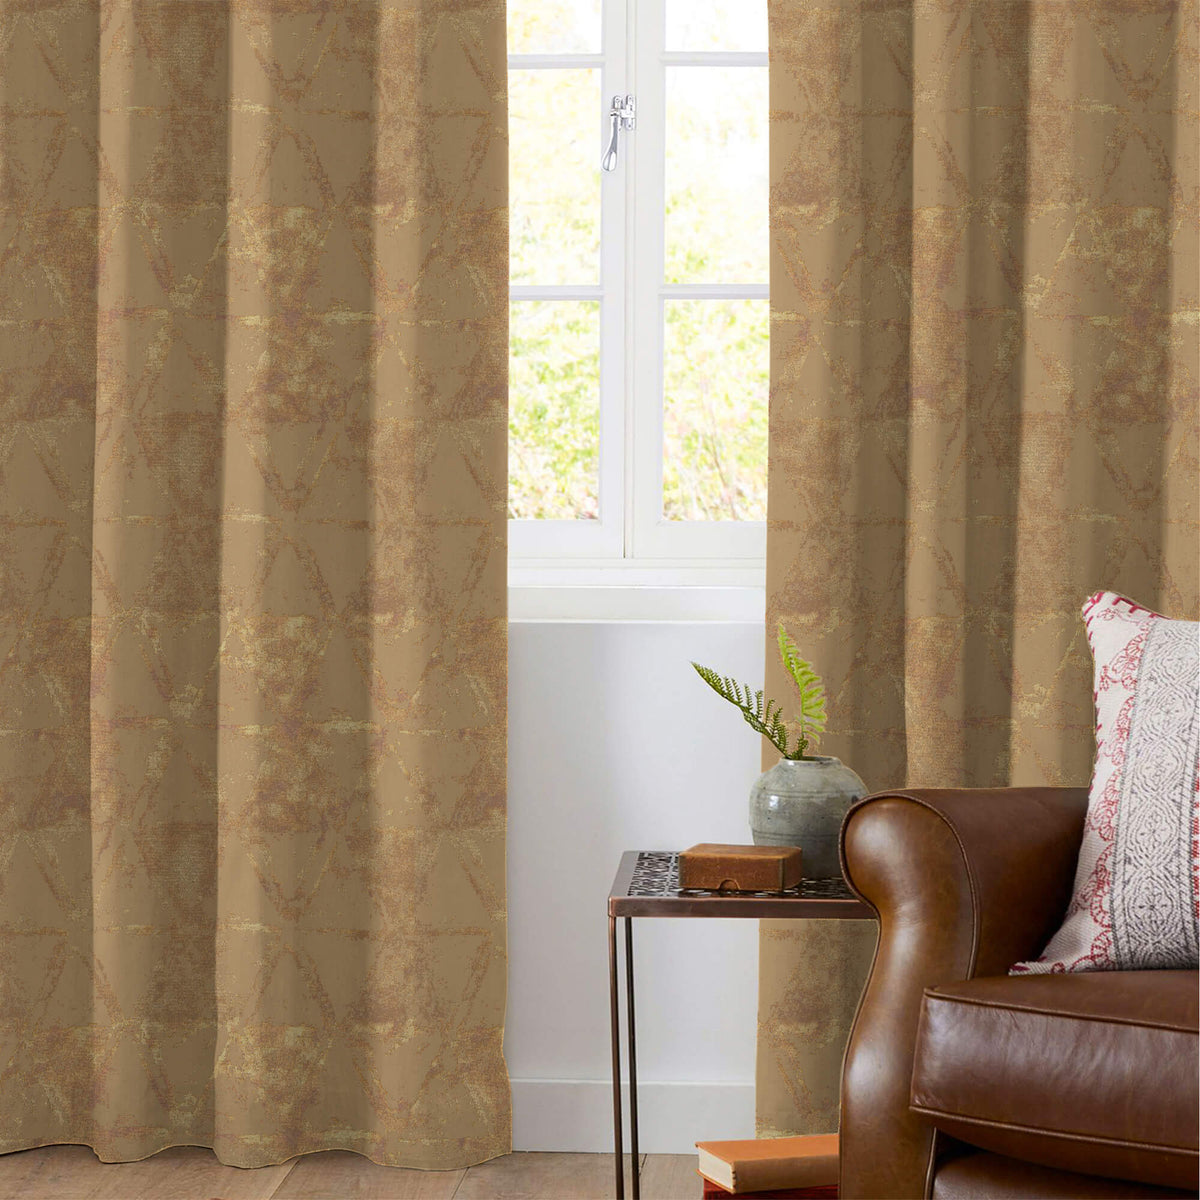 Tawny Brown Geometric Pattern Golden Foil Premium Curtain Fabric (Width 54 Inches)